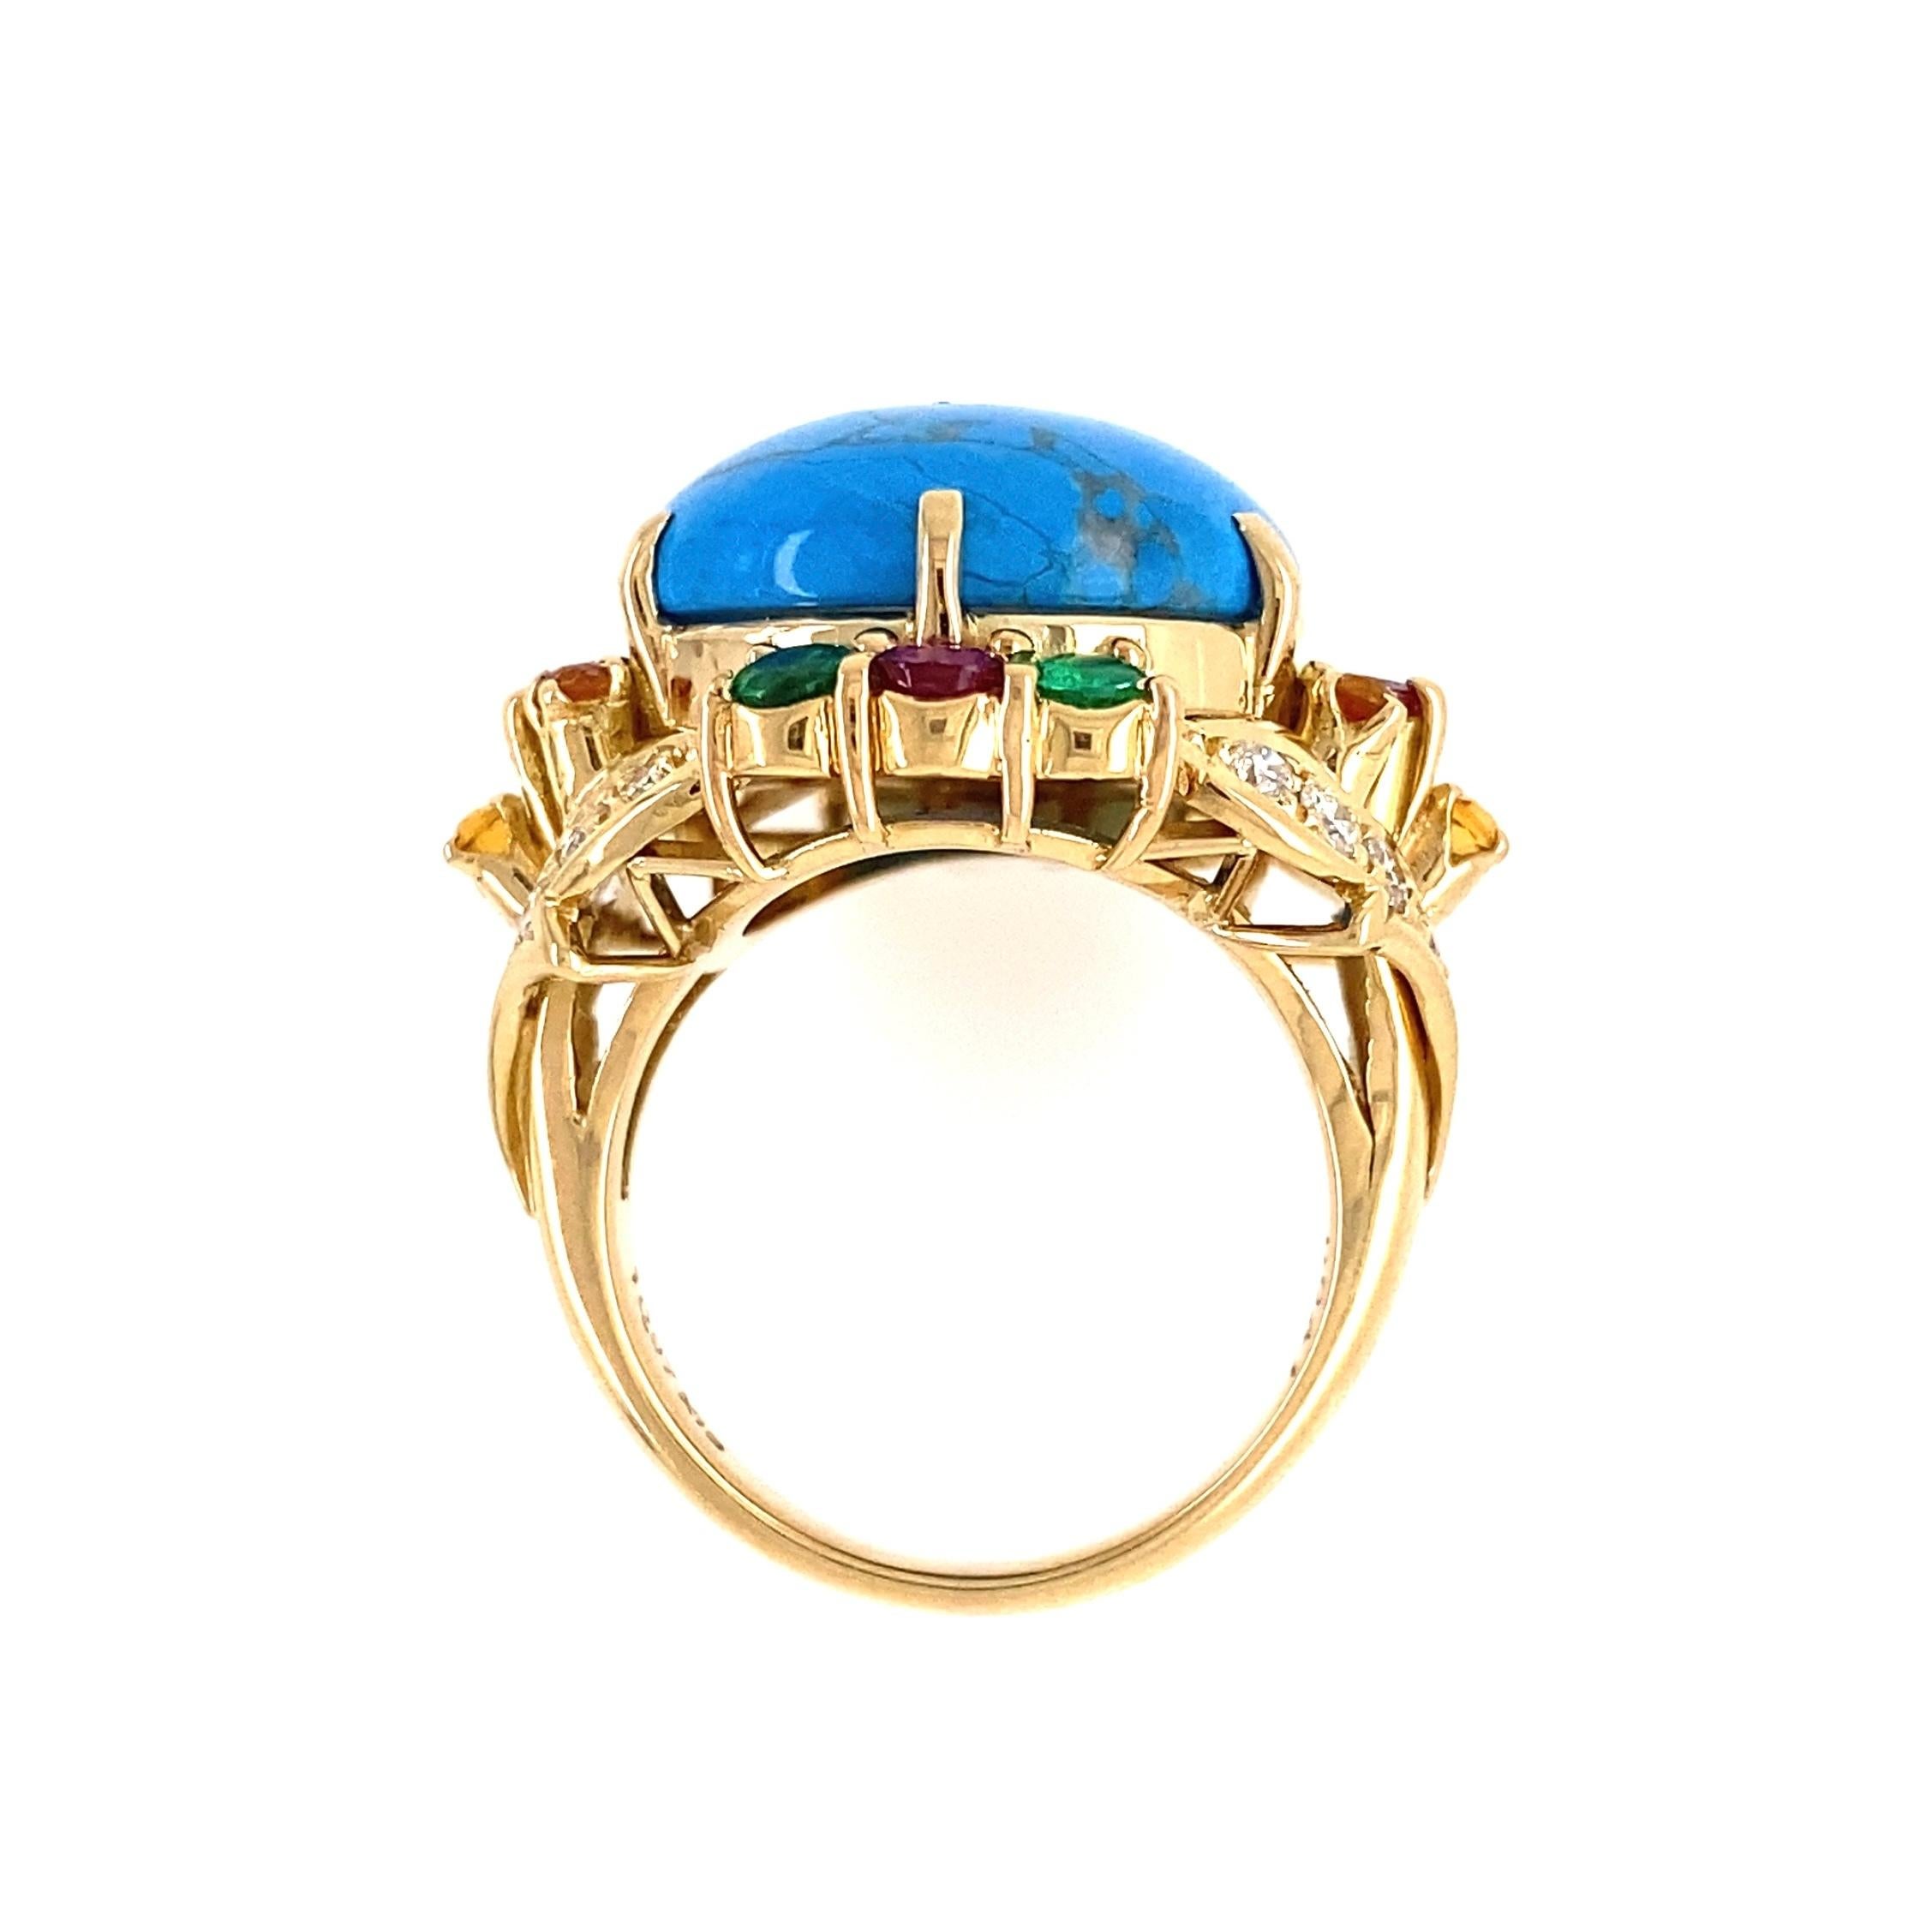 Mixed Cut 5.5 Carat Turquoise Diamond Emerald Ruby Gold Cocktail Ring Estate Fine Jewelry For Sale